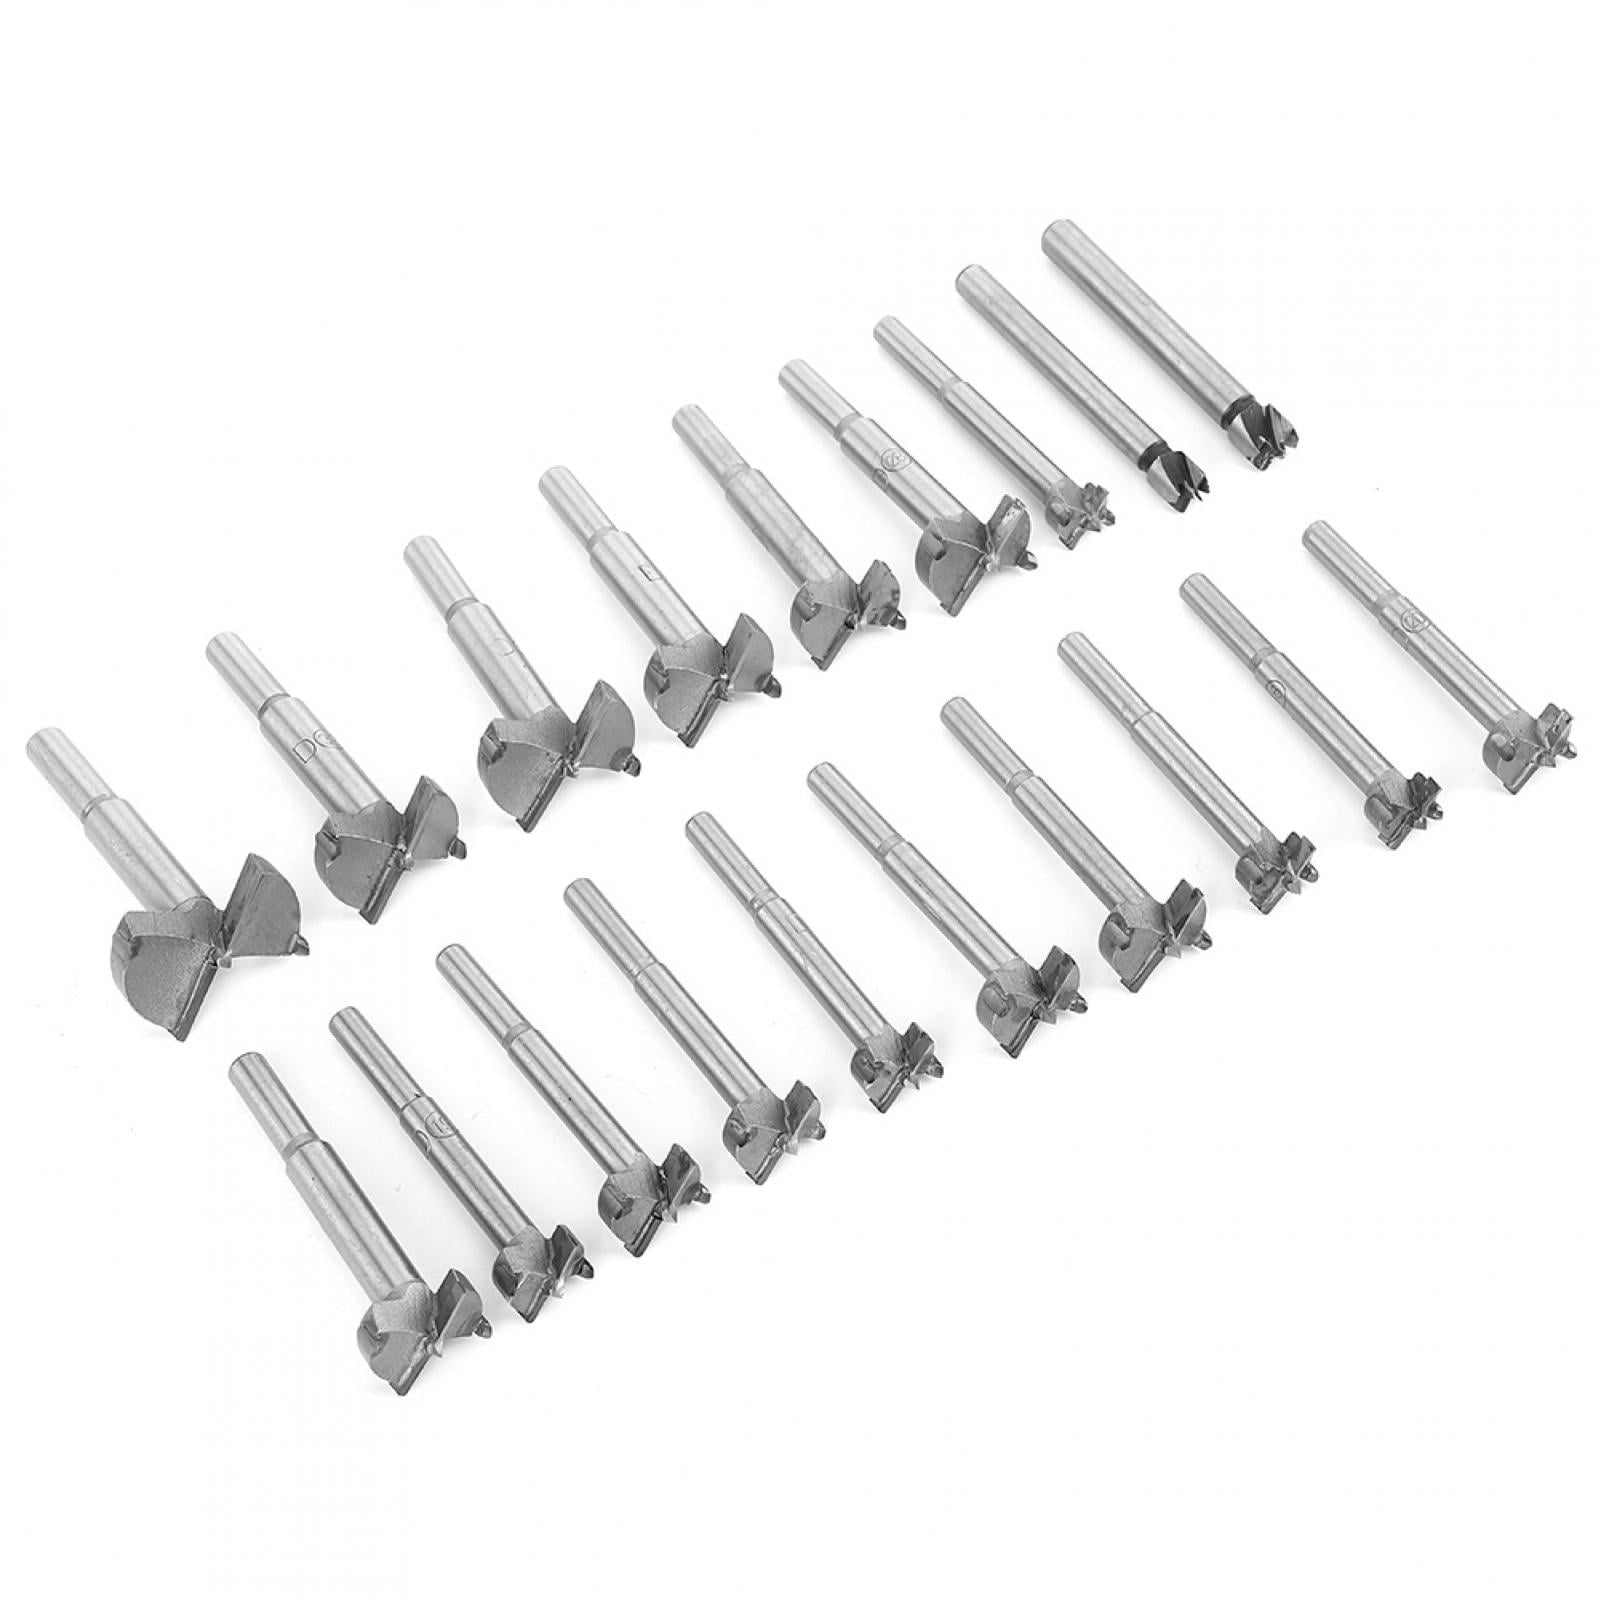 19Pcs Titanium Alloy Steel X-Wing Head Wood Tool Punching Bits Drilling Hole Forstner Bits Kit for Industrial Hinge Installation Wood Processing and Maintenance Forstner Drill Bit Set 